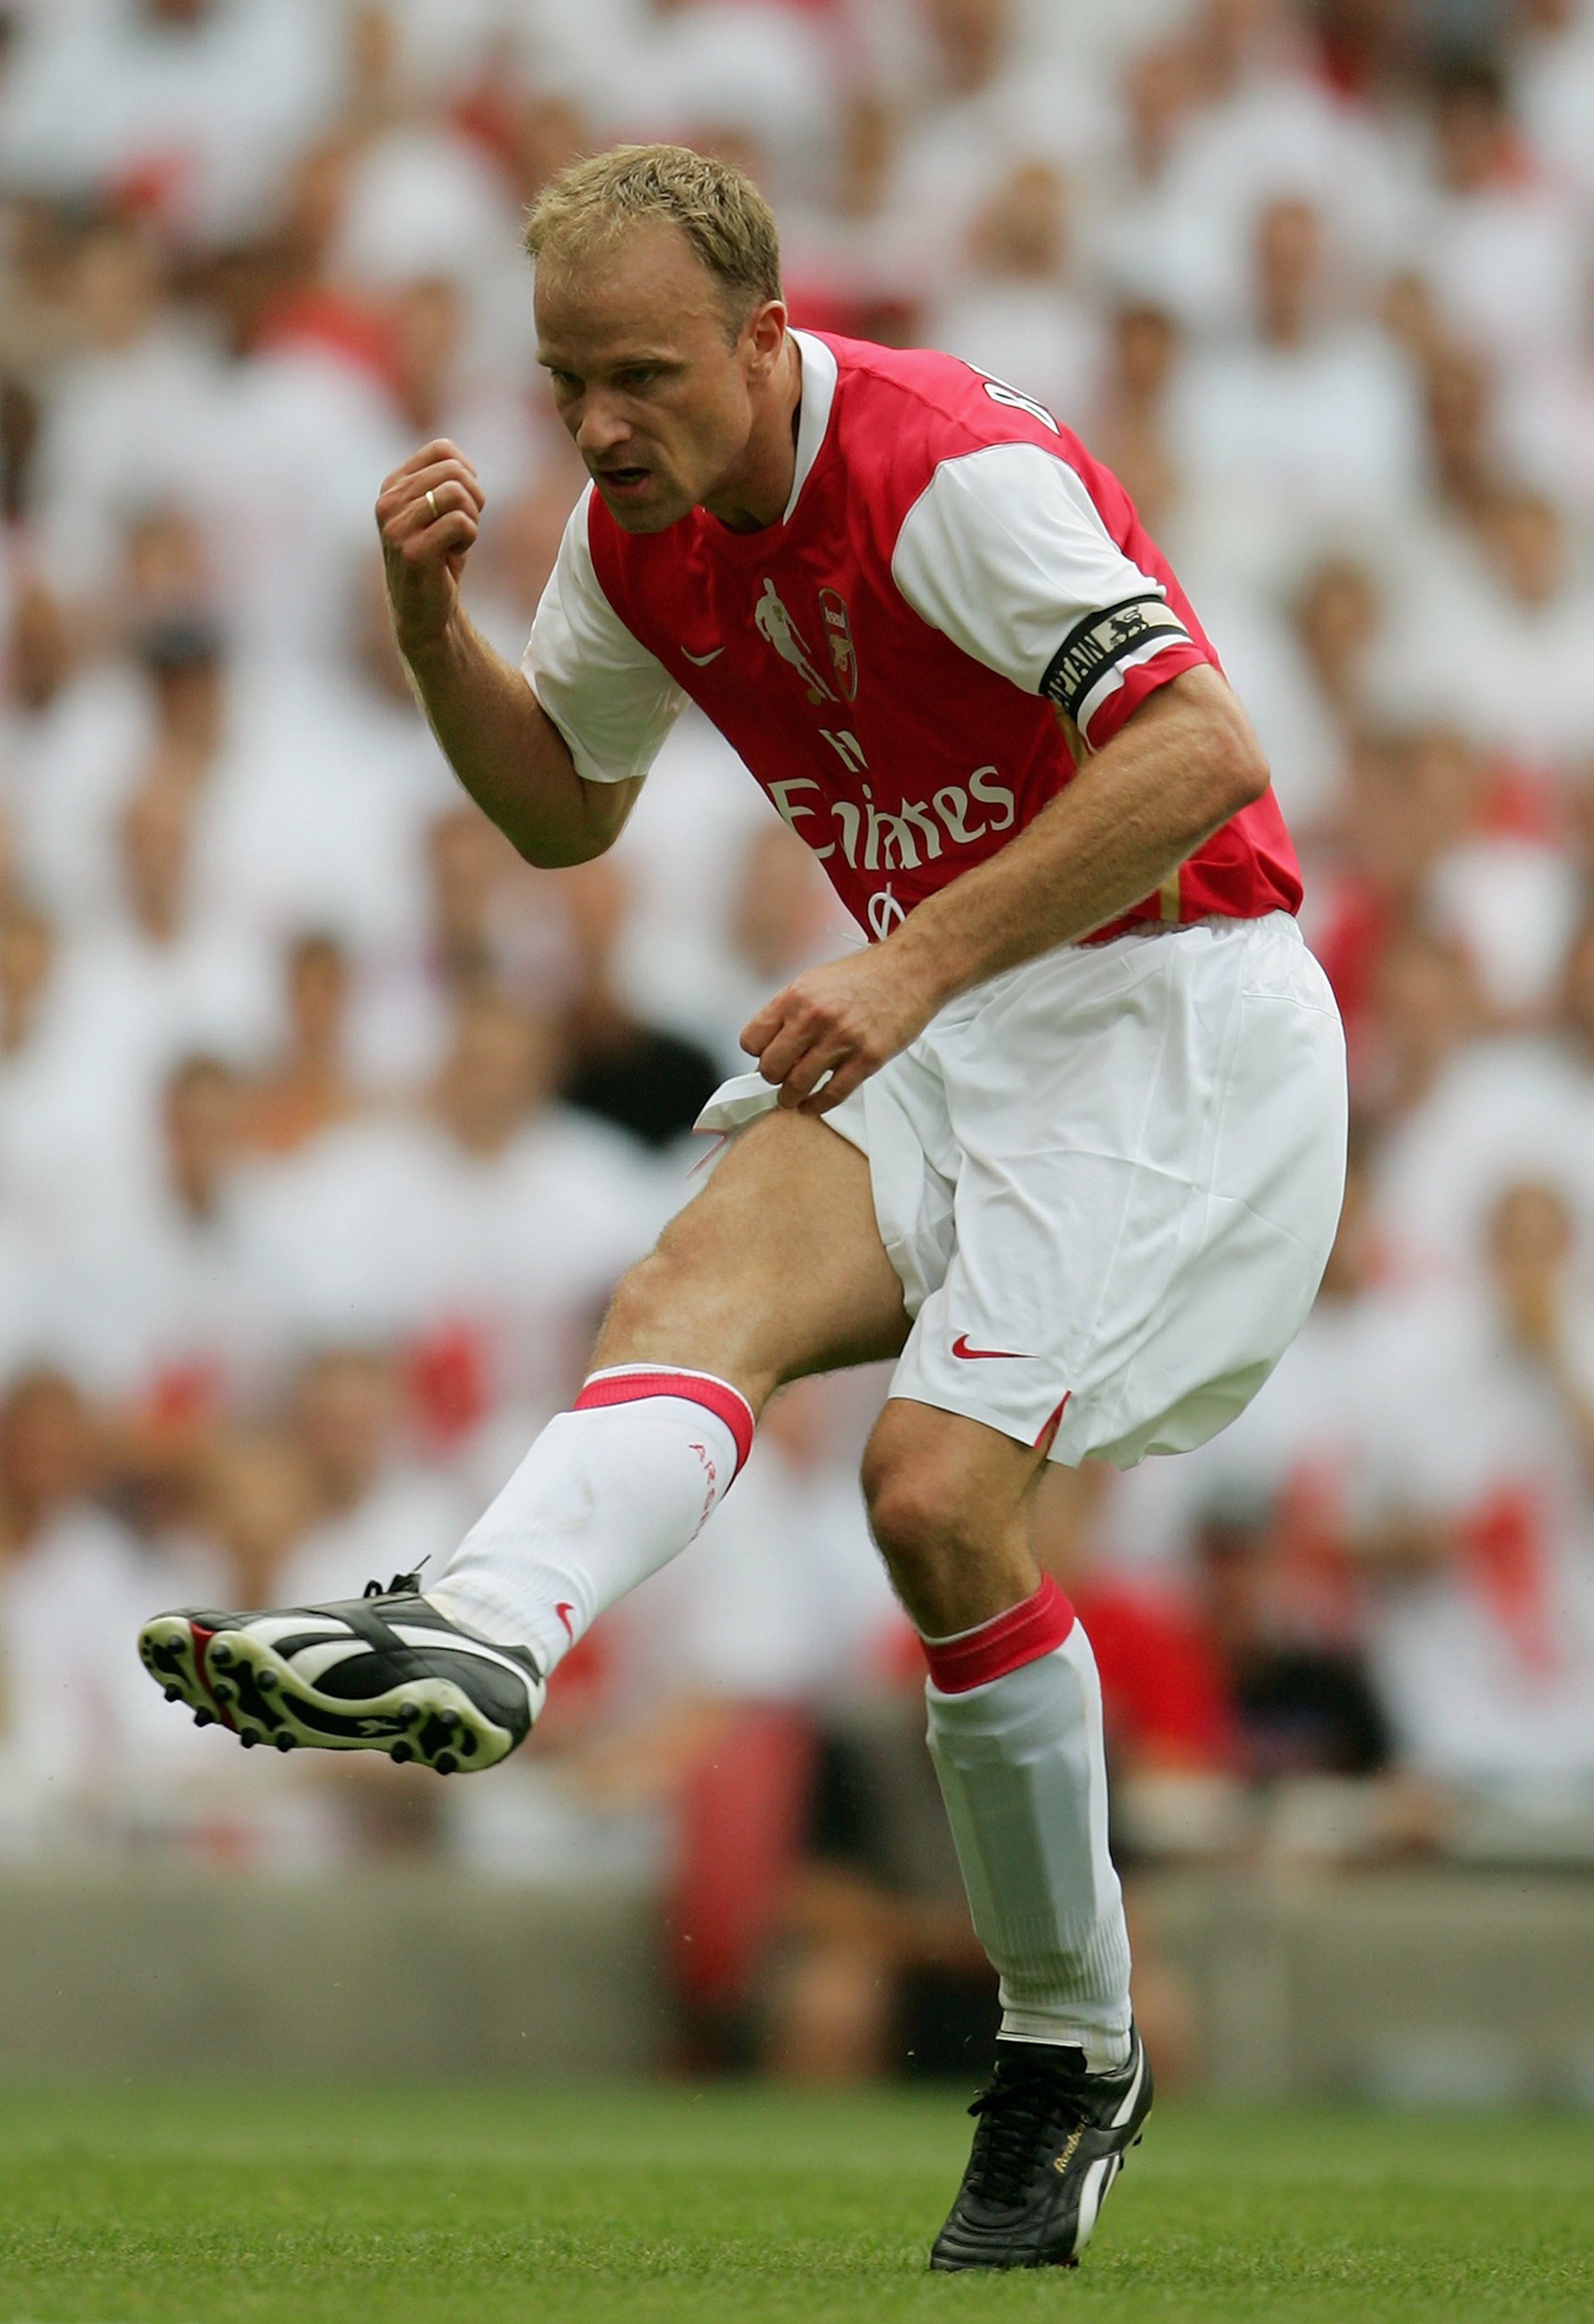 LONDON - JULY 22:  Dennis Bergkamp of Arsenal shoots on goal during the Dennis Bergkamp testimonial match between Arsenal and Ajax at the Emirates Stadium on July 22, 2006 in London, England.  (Photo by Jamie McDonald/Getty Images)